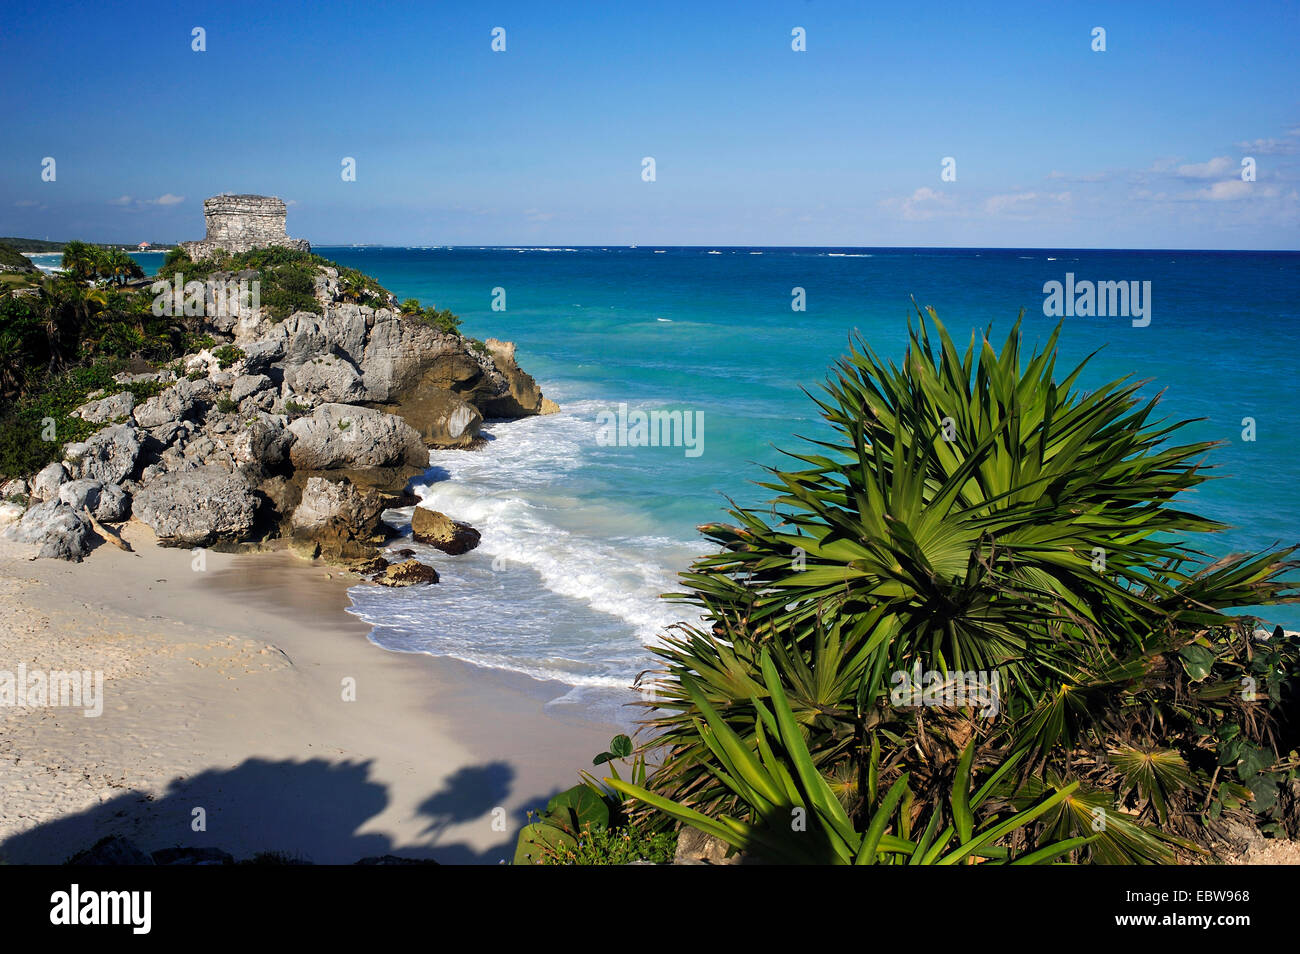 building at the Maya city of Tulum over the breach of the Caribbean Sea, Mexico, Riviera Maya Stock Photo